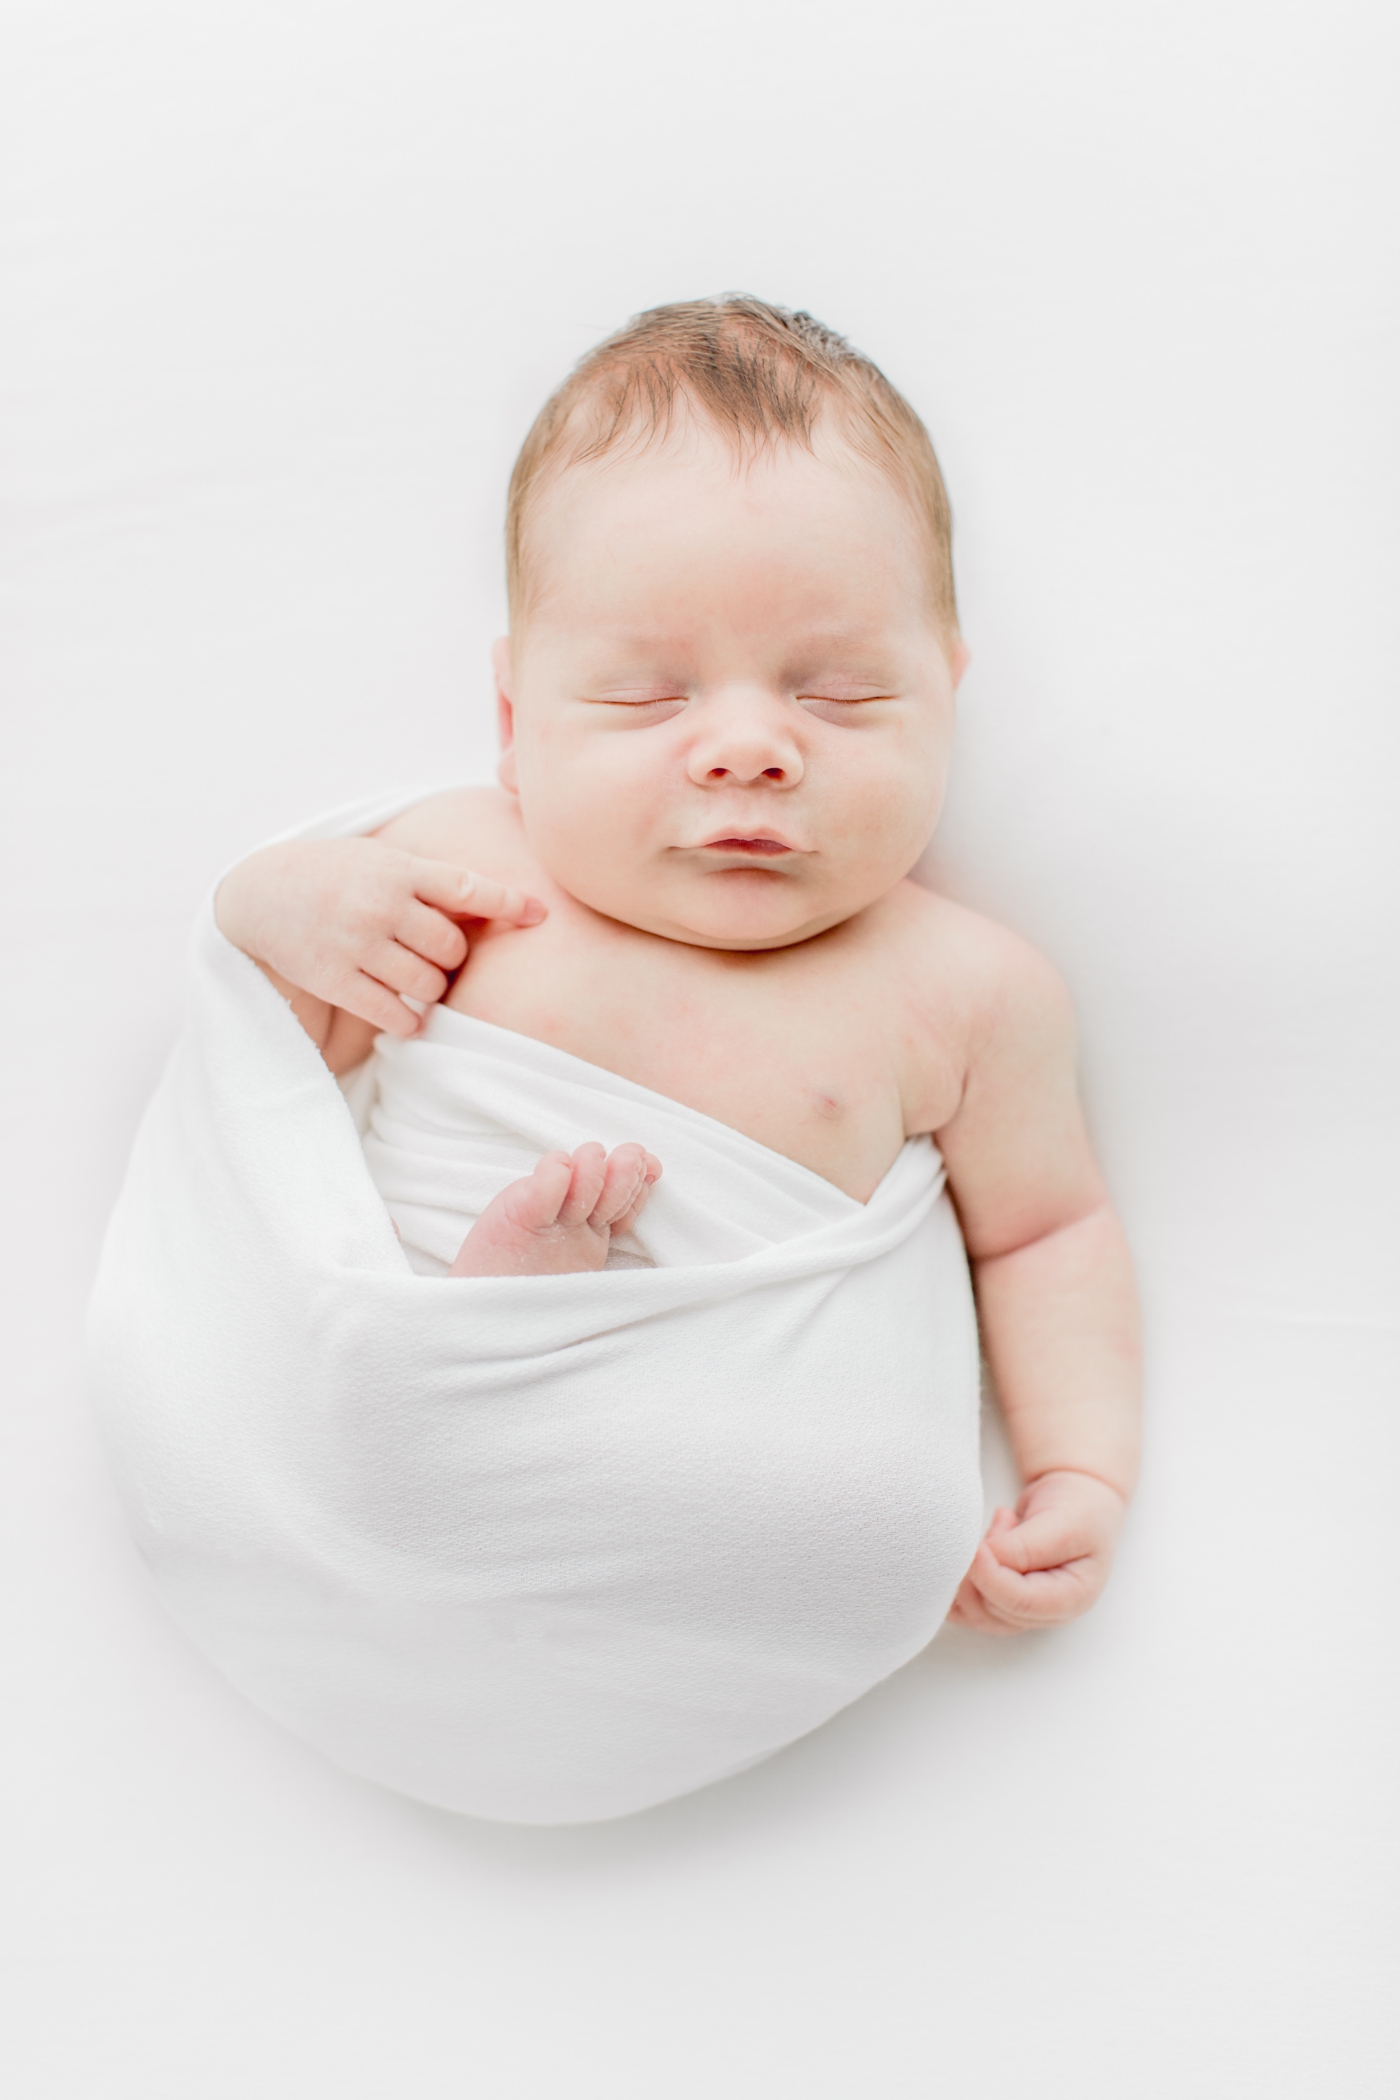 Baby boy sleeping in white swaddle during studio newborn session. Photo by Sana Ahmed Photography.